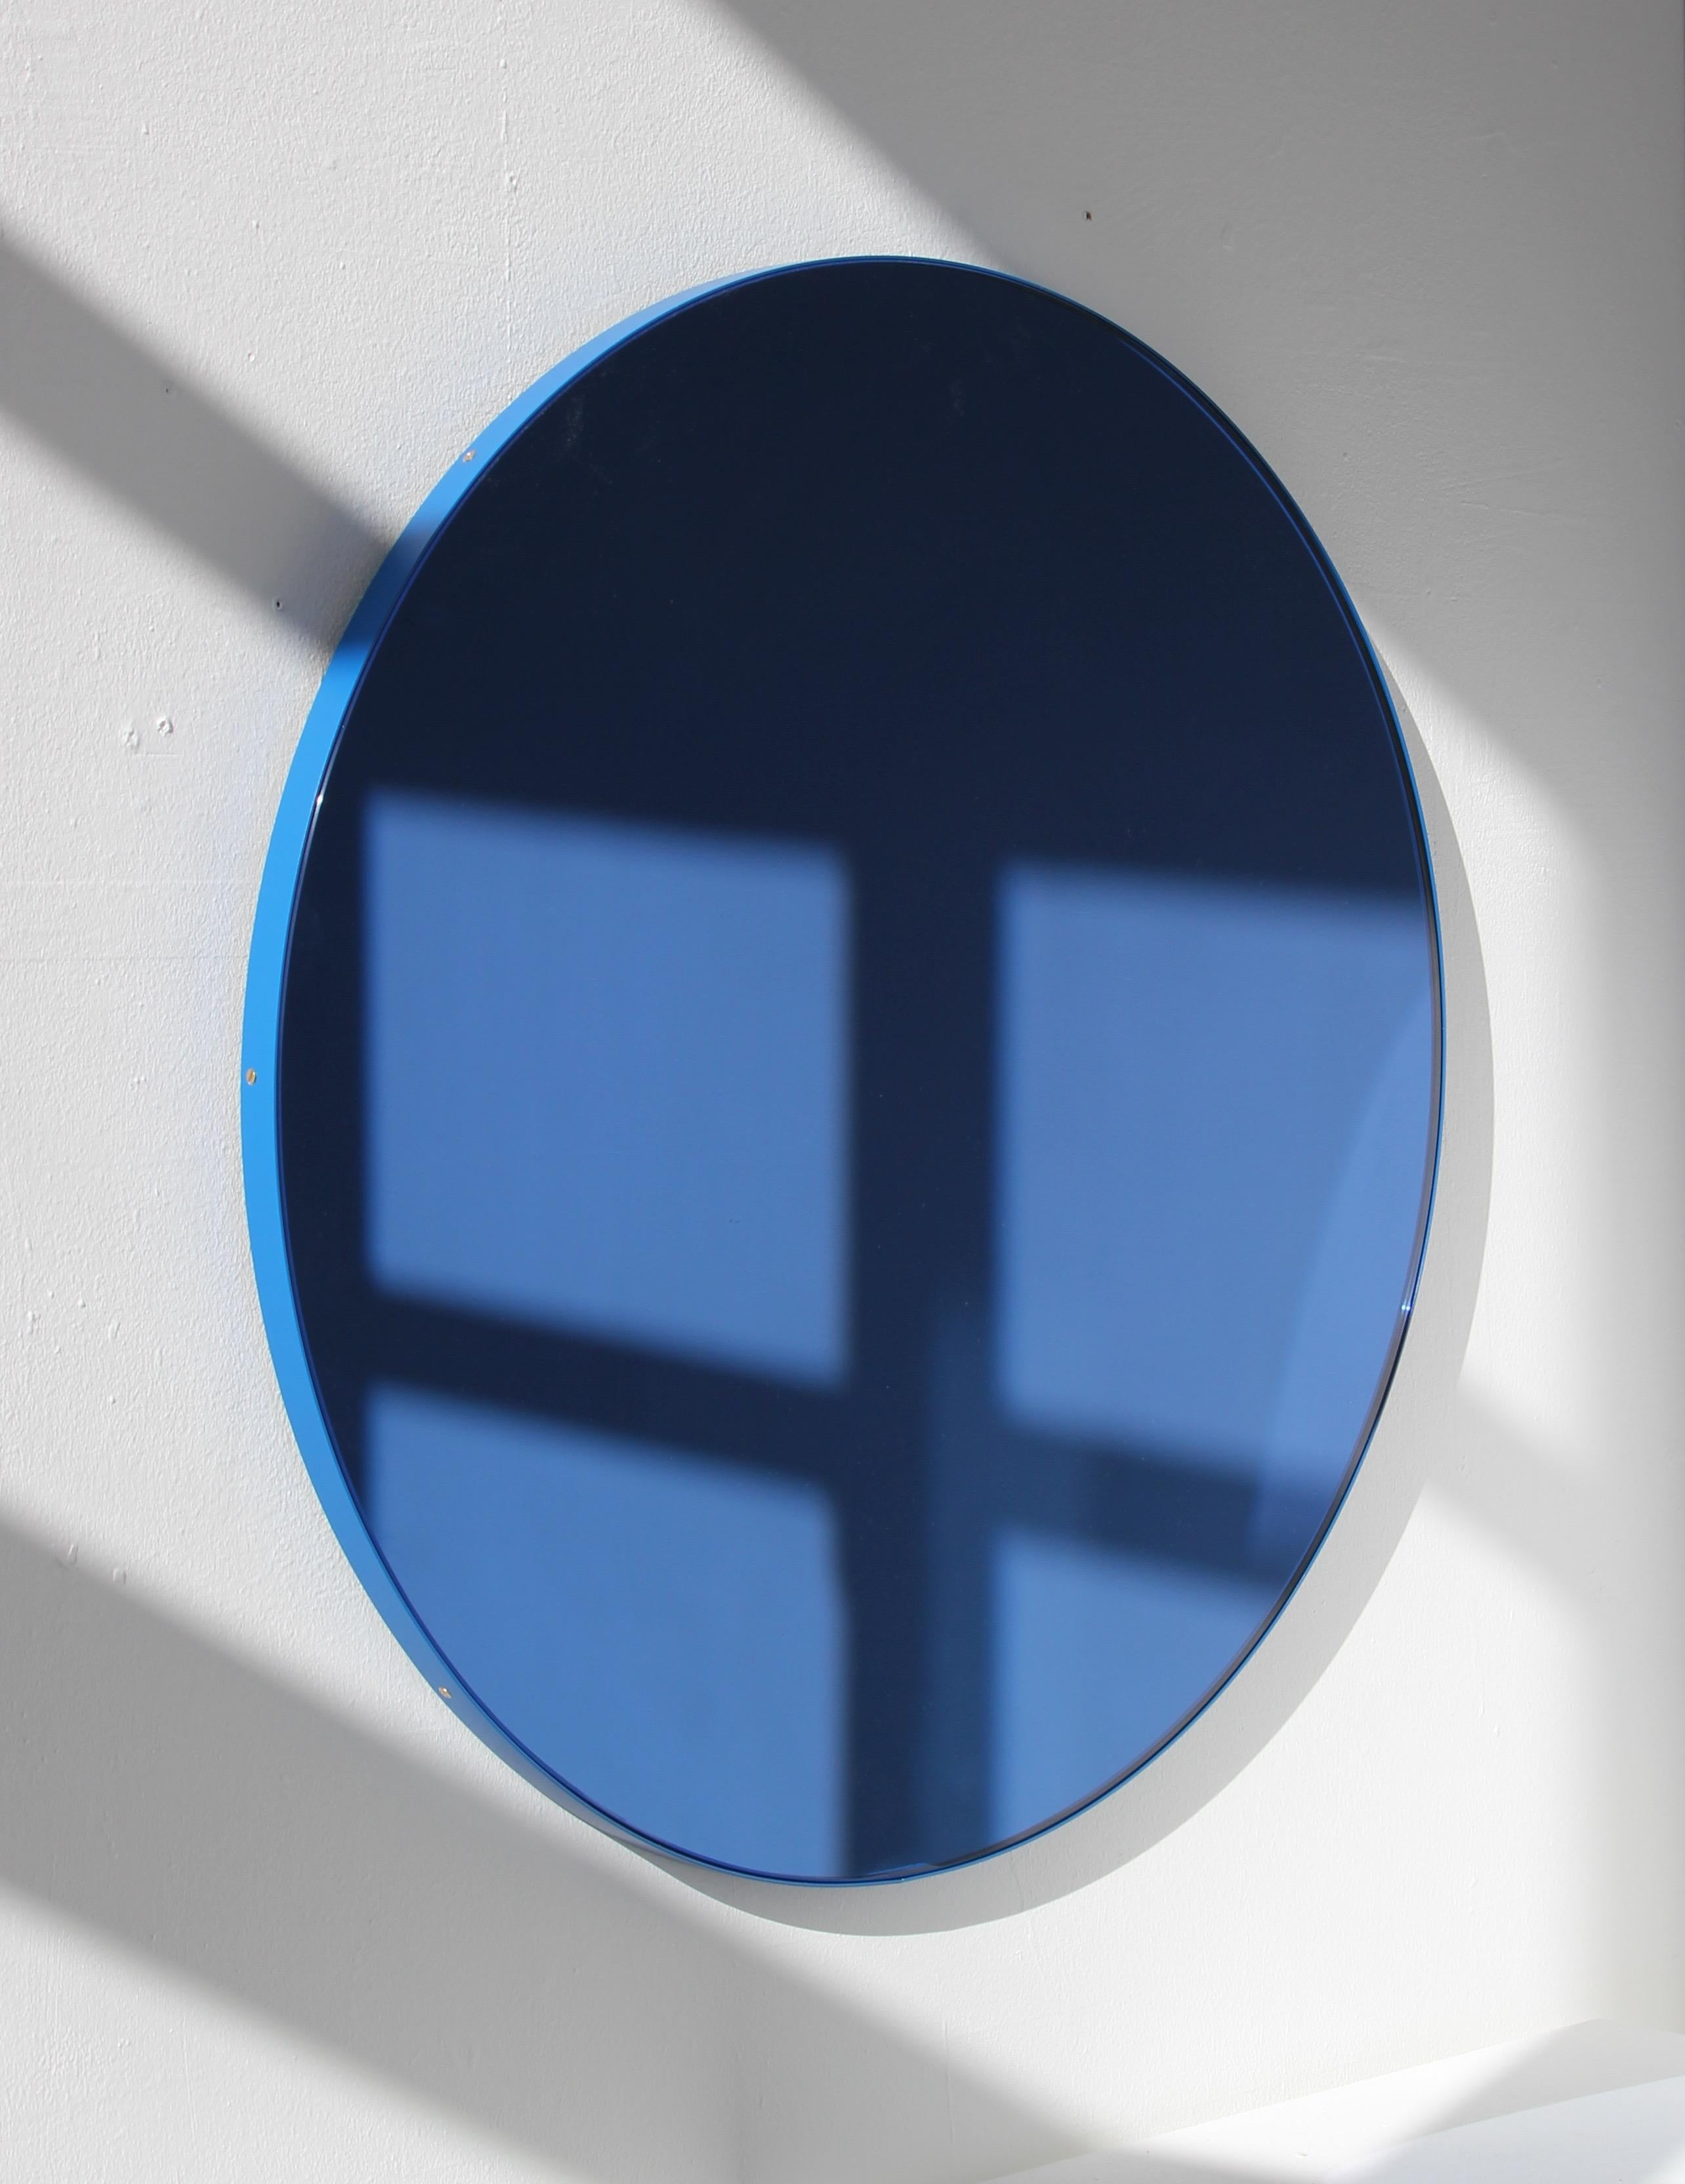 Contemporary blue tinted round mirror with an aluminium powder coated blue frame. Designed and hand-crafted in London, UK.

Medium, large and extra-large mirrors (60, 80 and 100cm) are fitted with an ingenious French cleat (split batten) system so